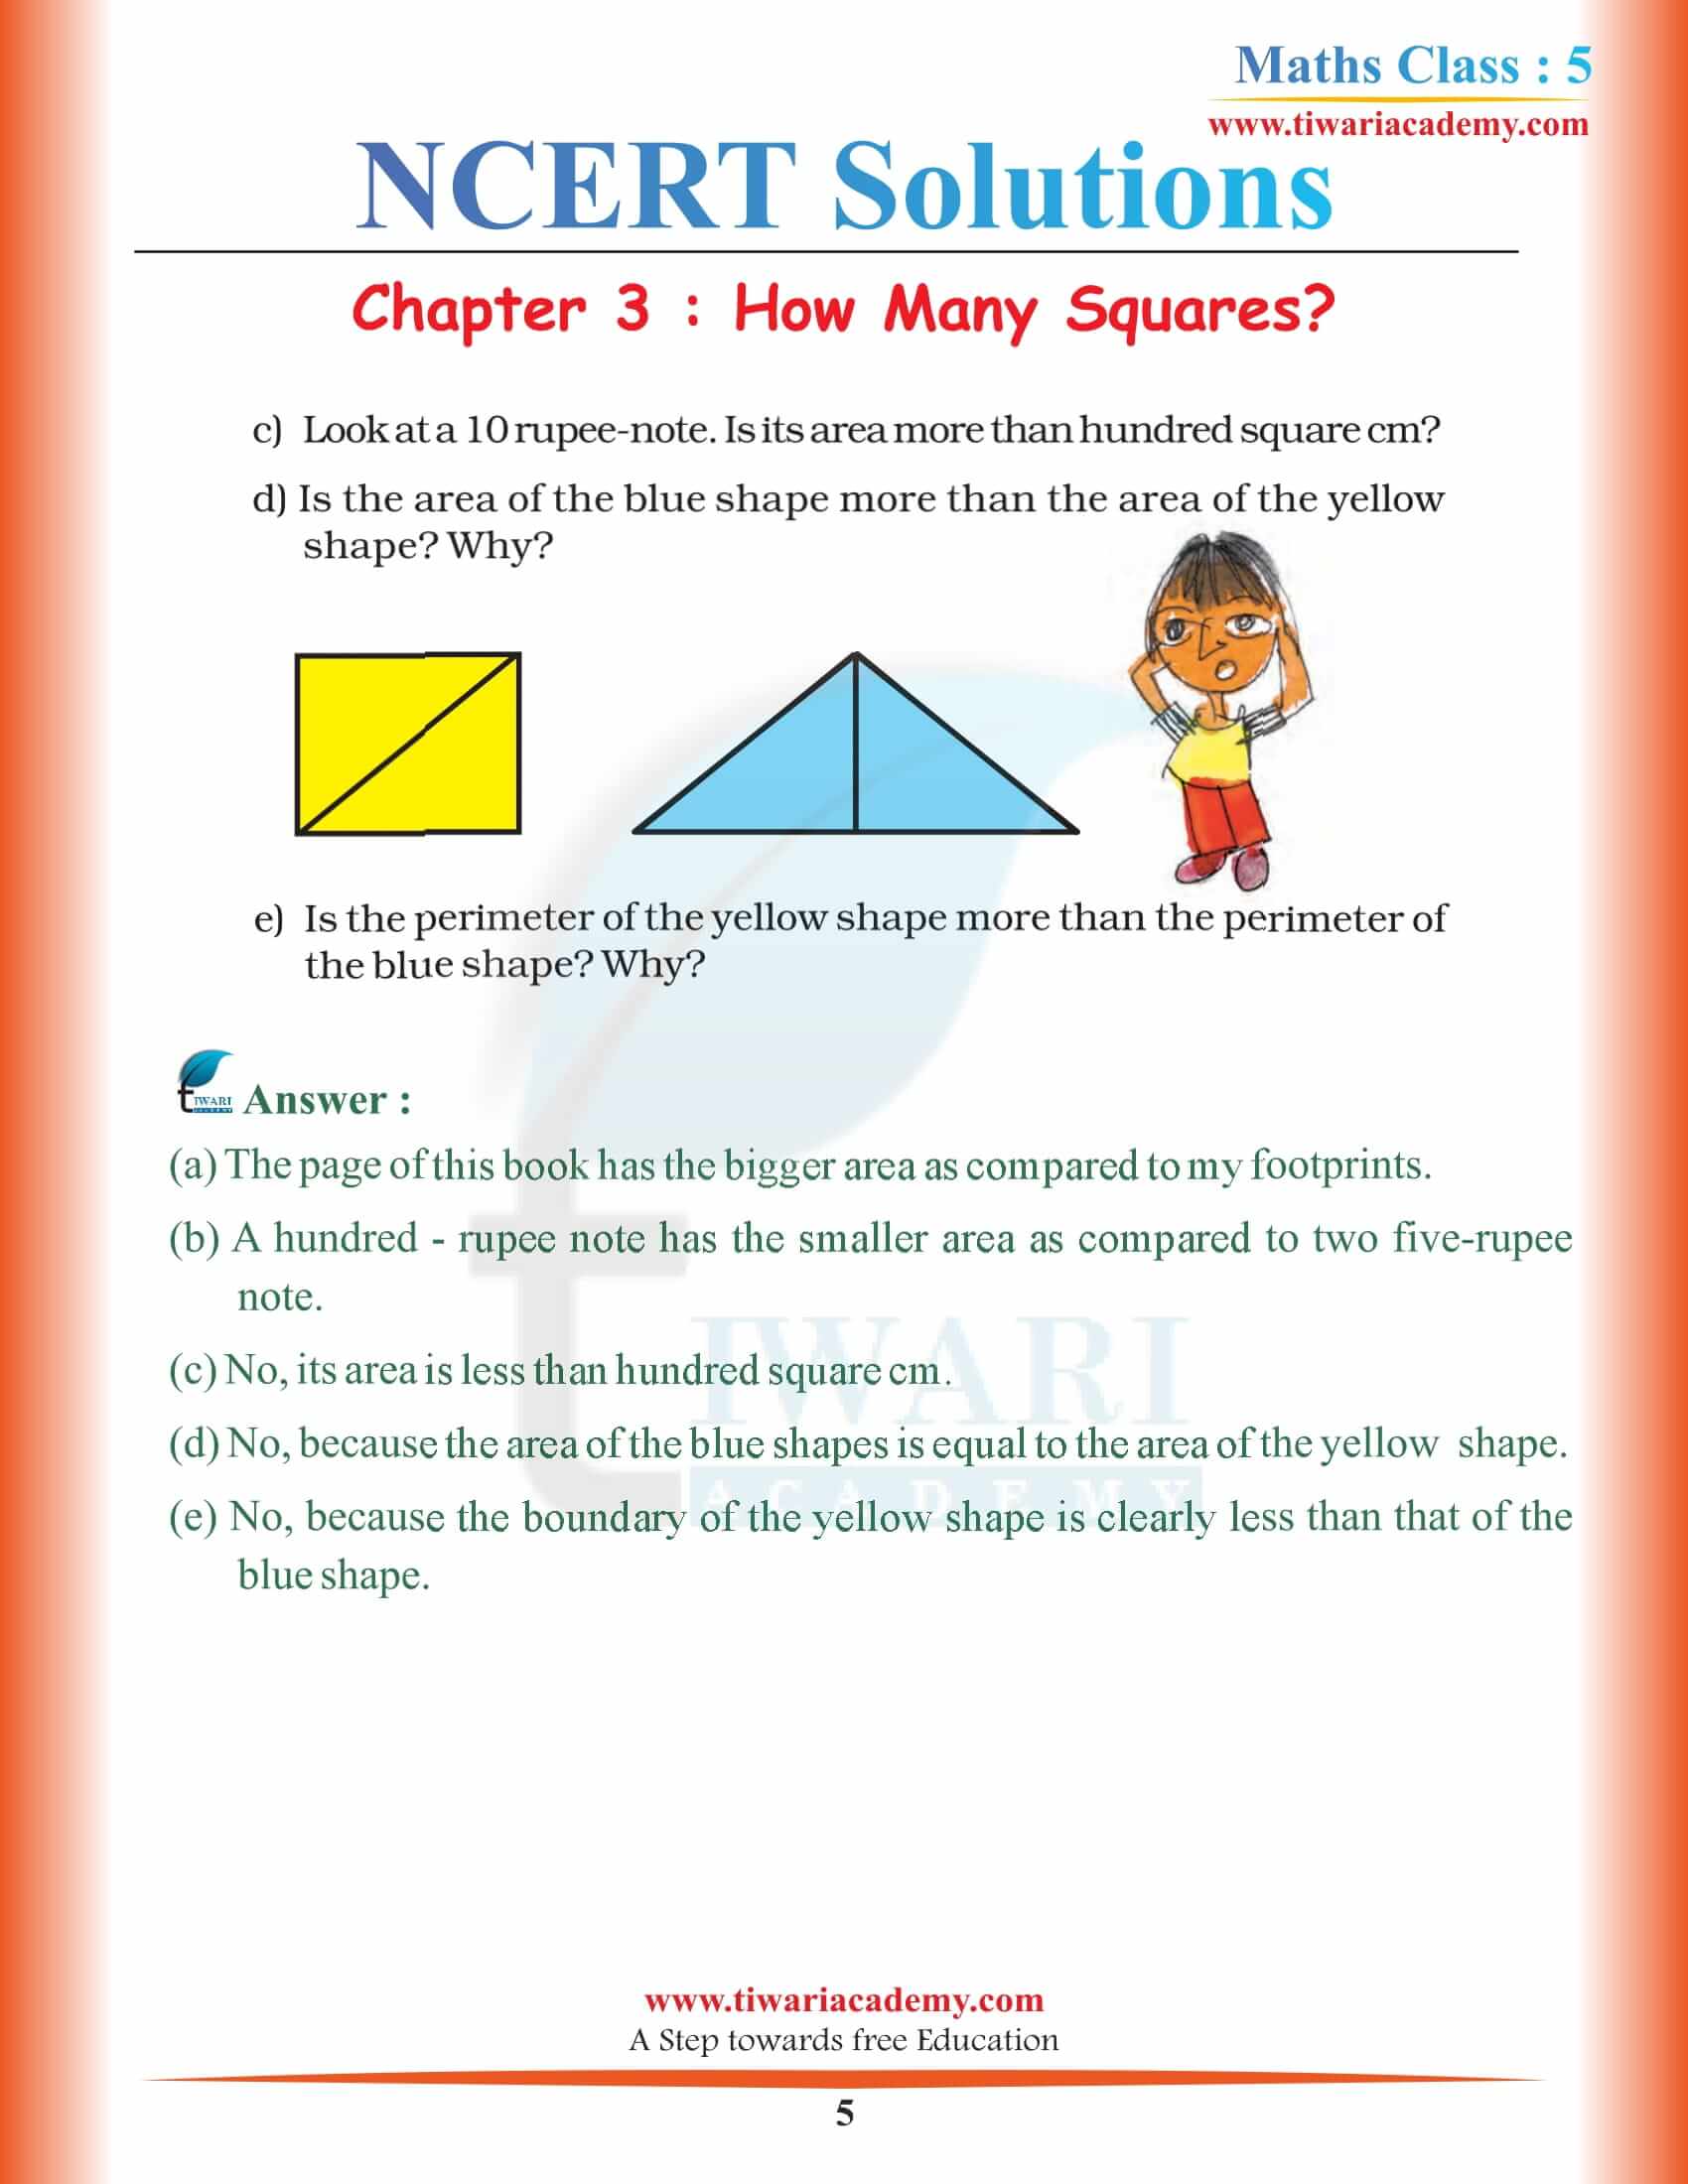 NCERT Solutions for Class 5 Maths Chapter 3 answers download